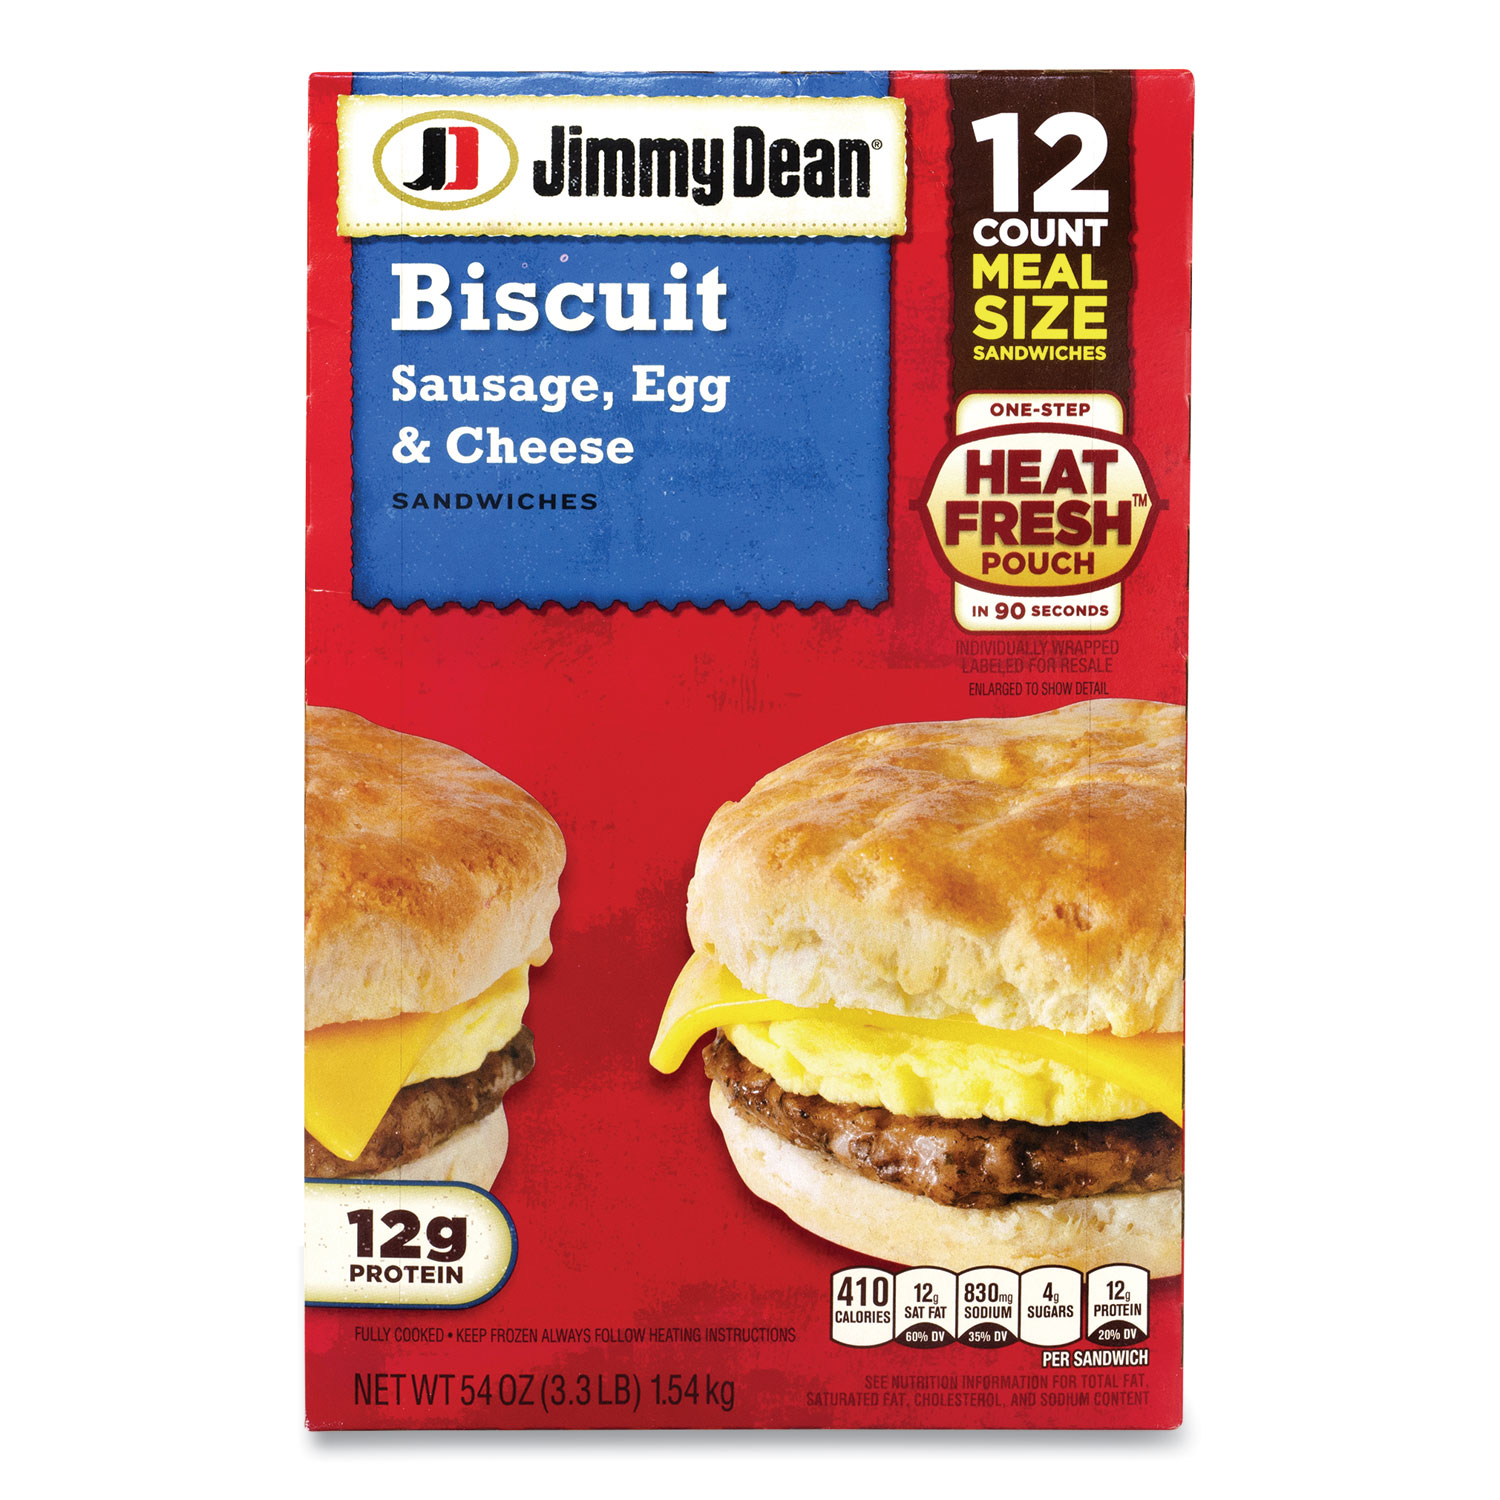  Jimmy Dean 31096 Biscuit Breakfast Sandwich, Sausage, Egg and Cheese, 54 oz, 12/Box, Free Delivery in 1-4 Business Days (GRR90300035) 